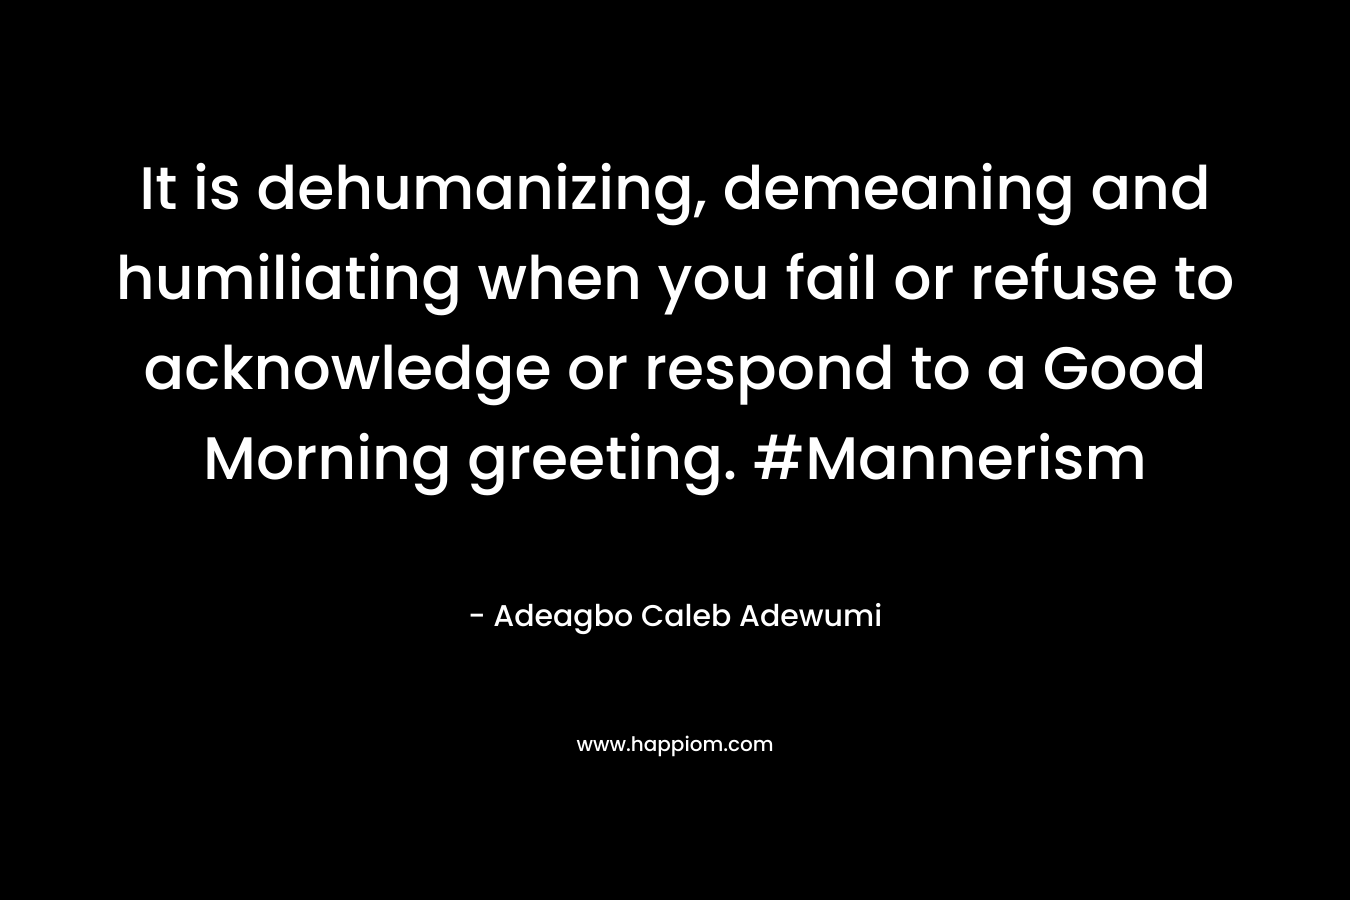 It is dehumanizing, demeaning and humiliating when you fail or refuse to acknowledge or respond to a Good Morning greeting. #Mannerism – Adeagbo Caleb Adewumi